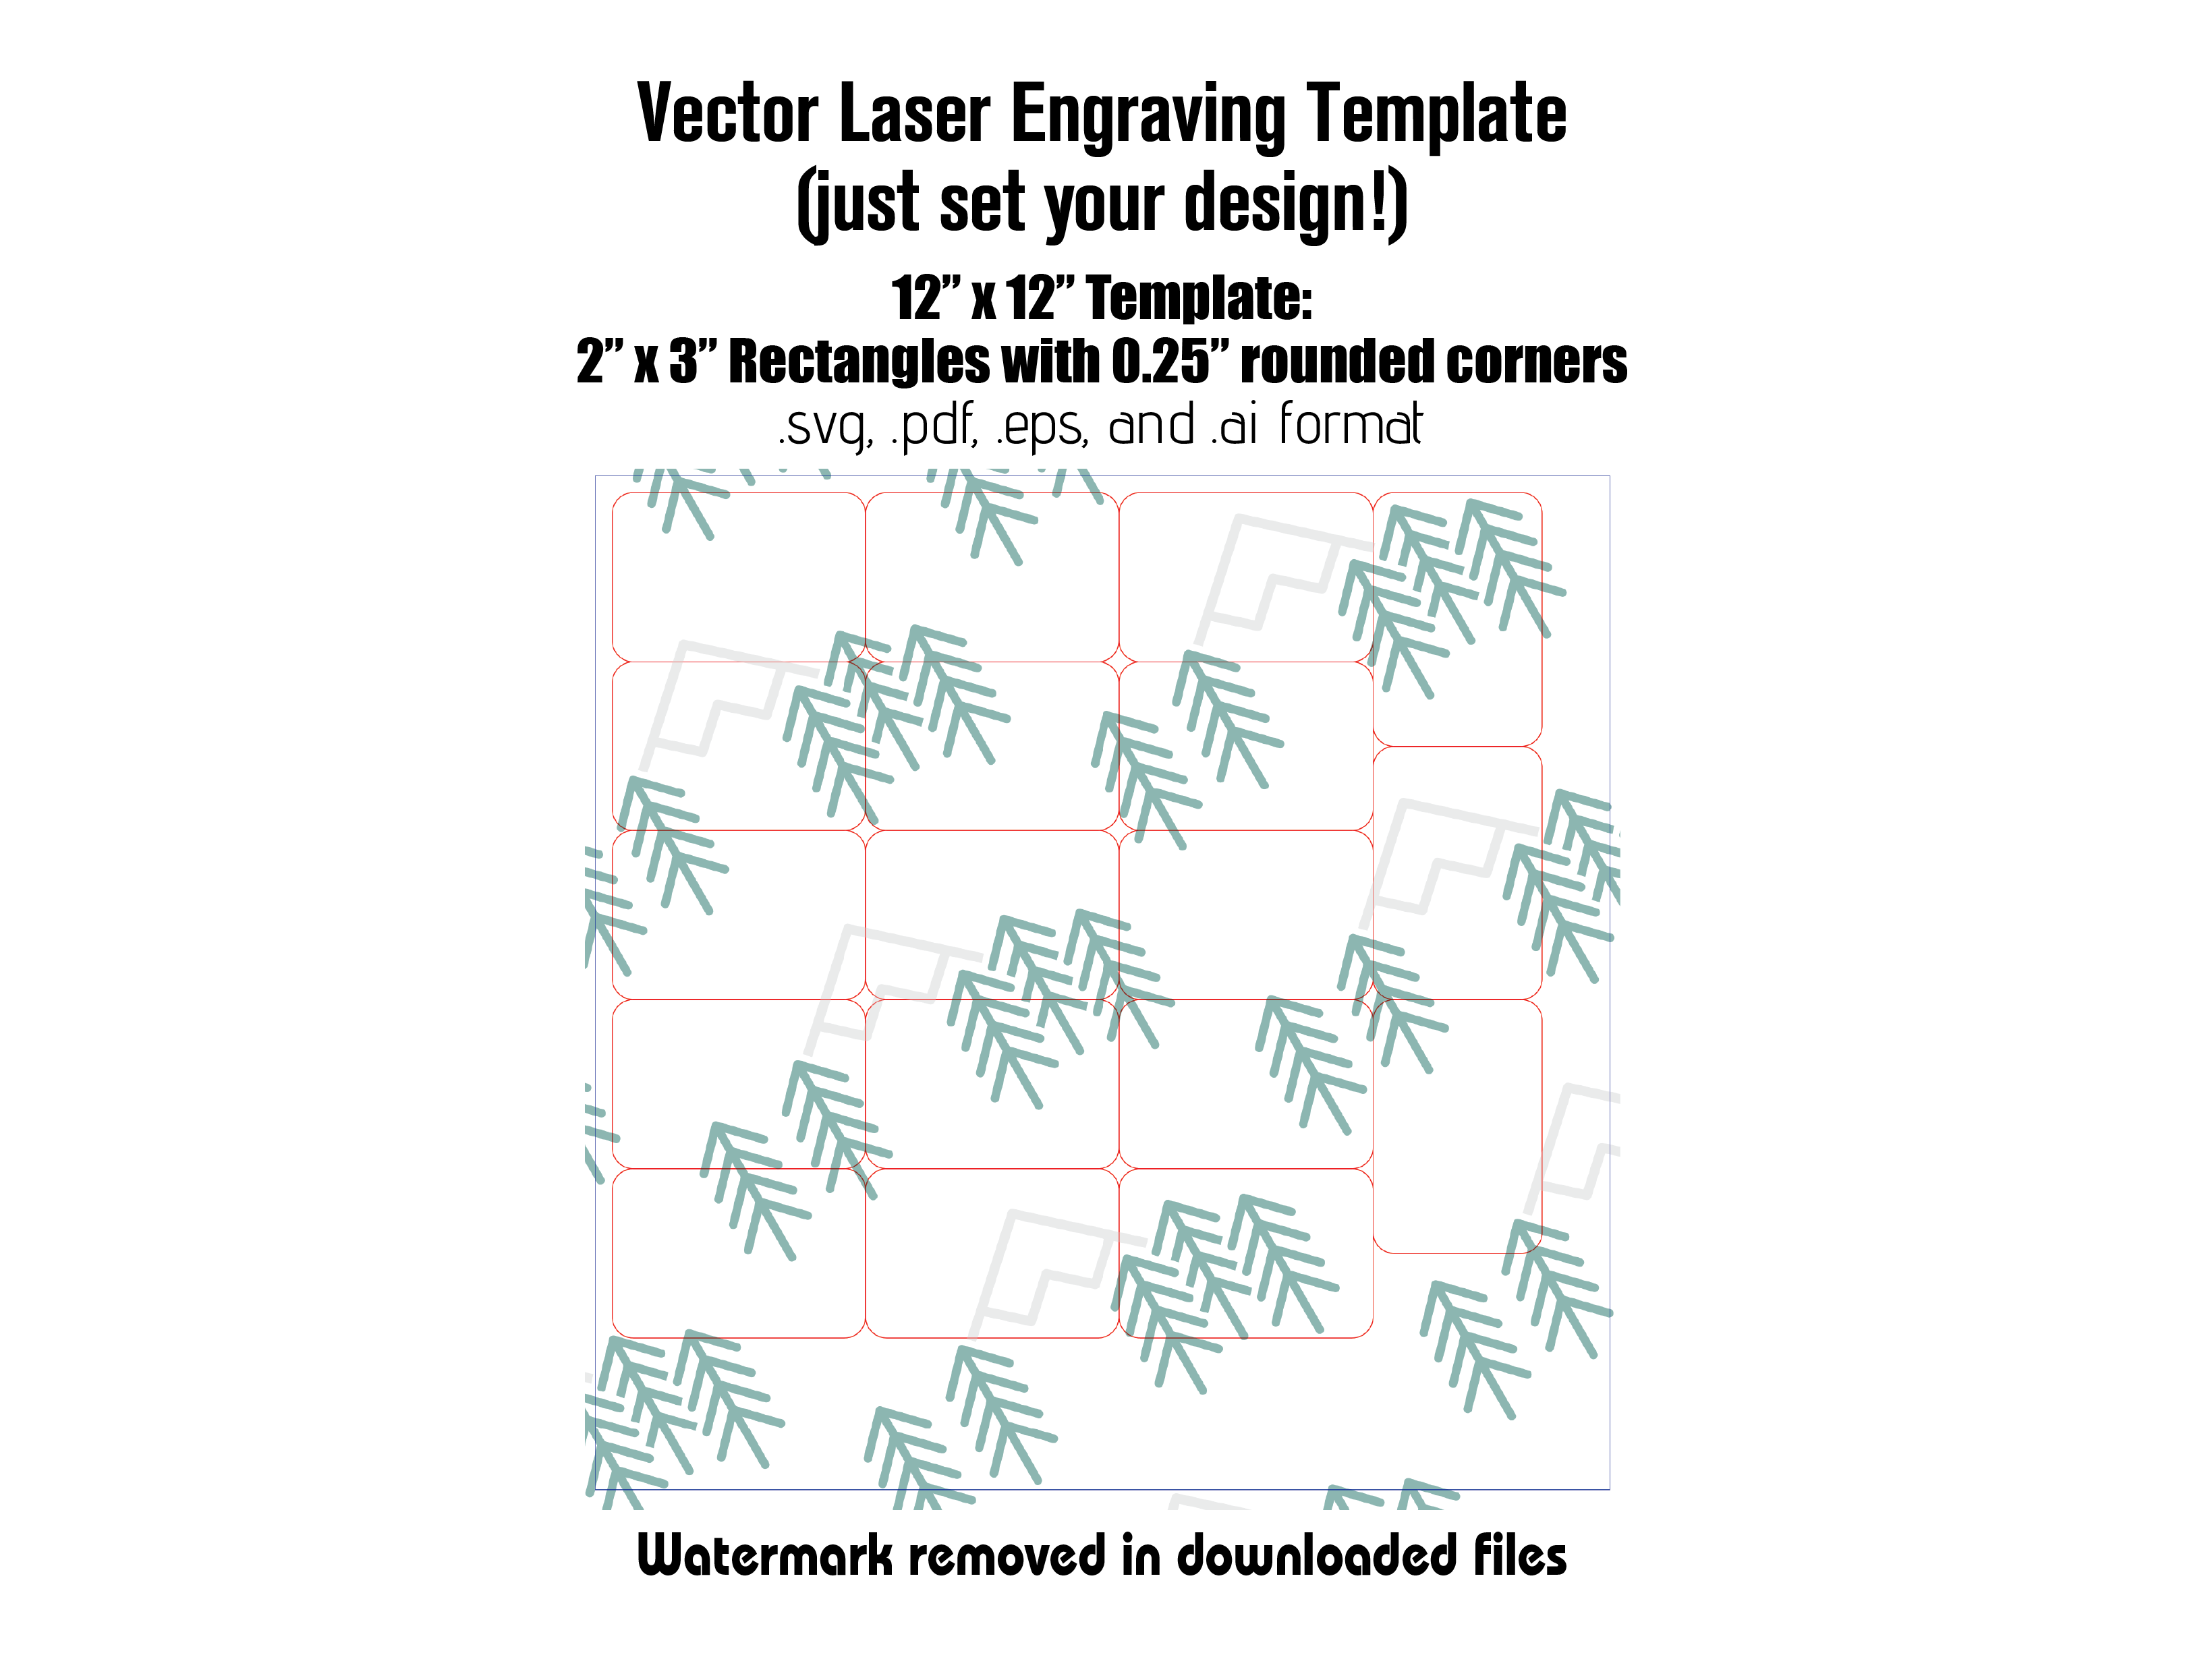 Digital Laser Cutting Template: 2" x 3" Rectangles w/Rounded Corners - 12" x 12" Sheet Size Digital Laser Engraving Files Craftworks NW 